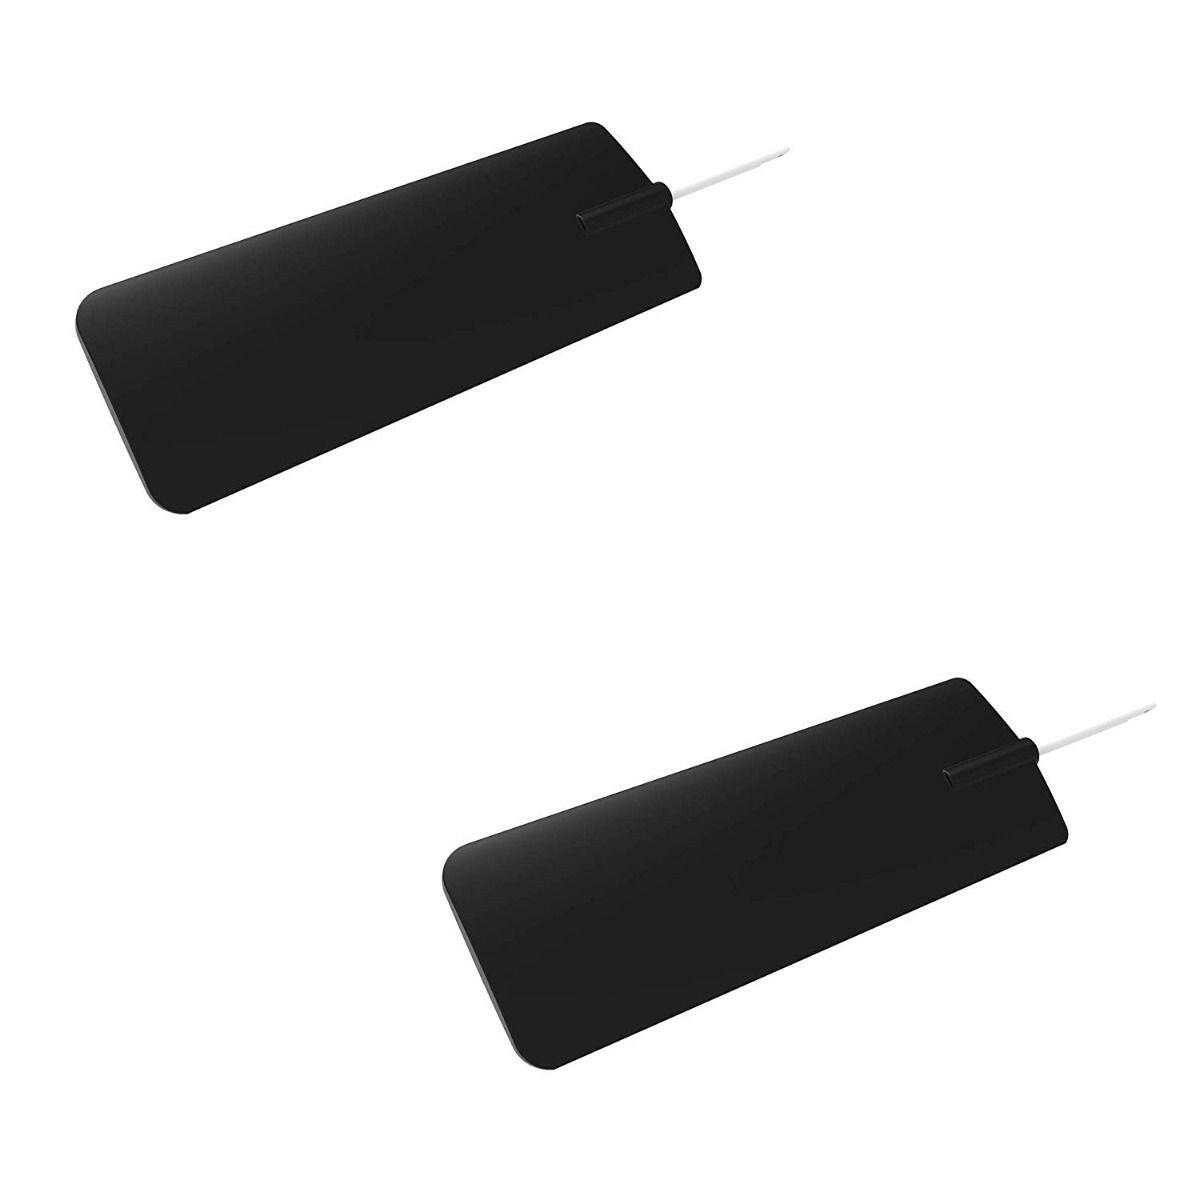 VOLANTEXRC RC Boat Spare Parts: Rudder for RC Sailing Boat Hurricane